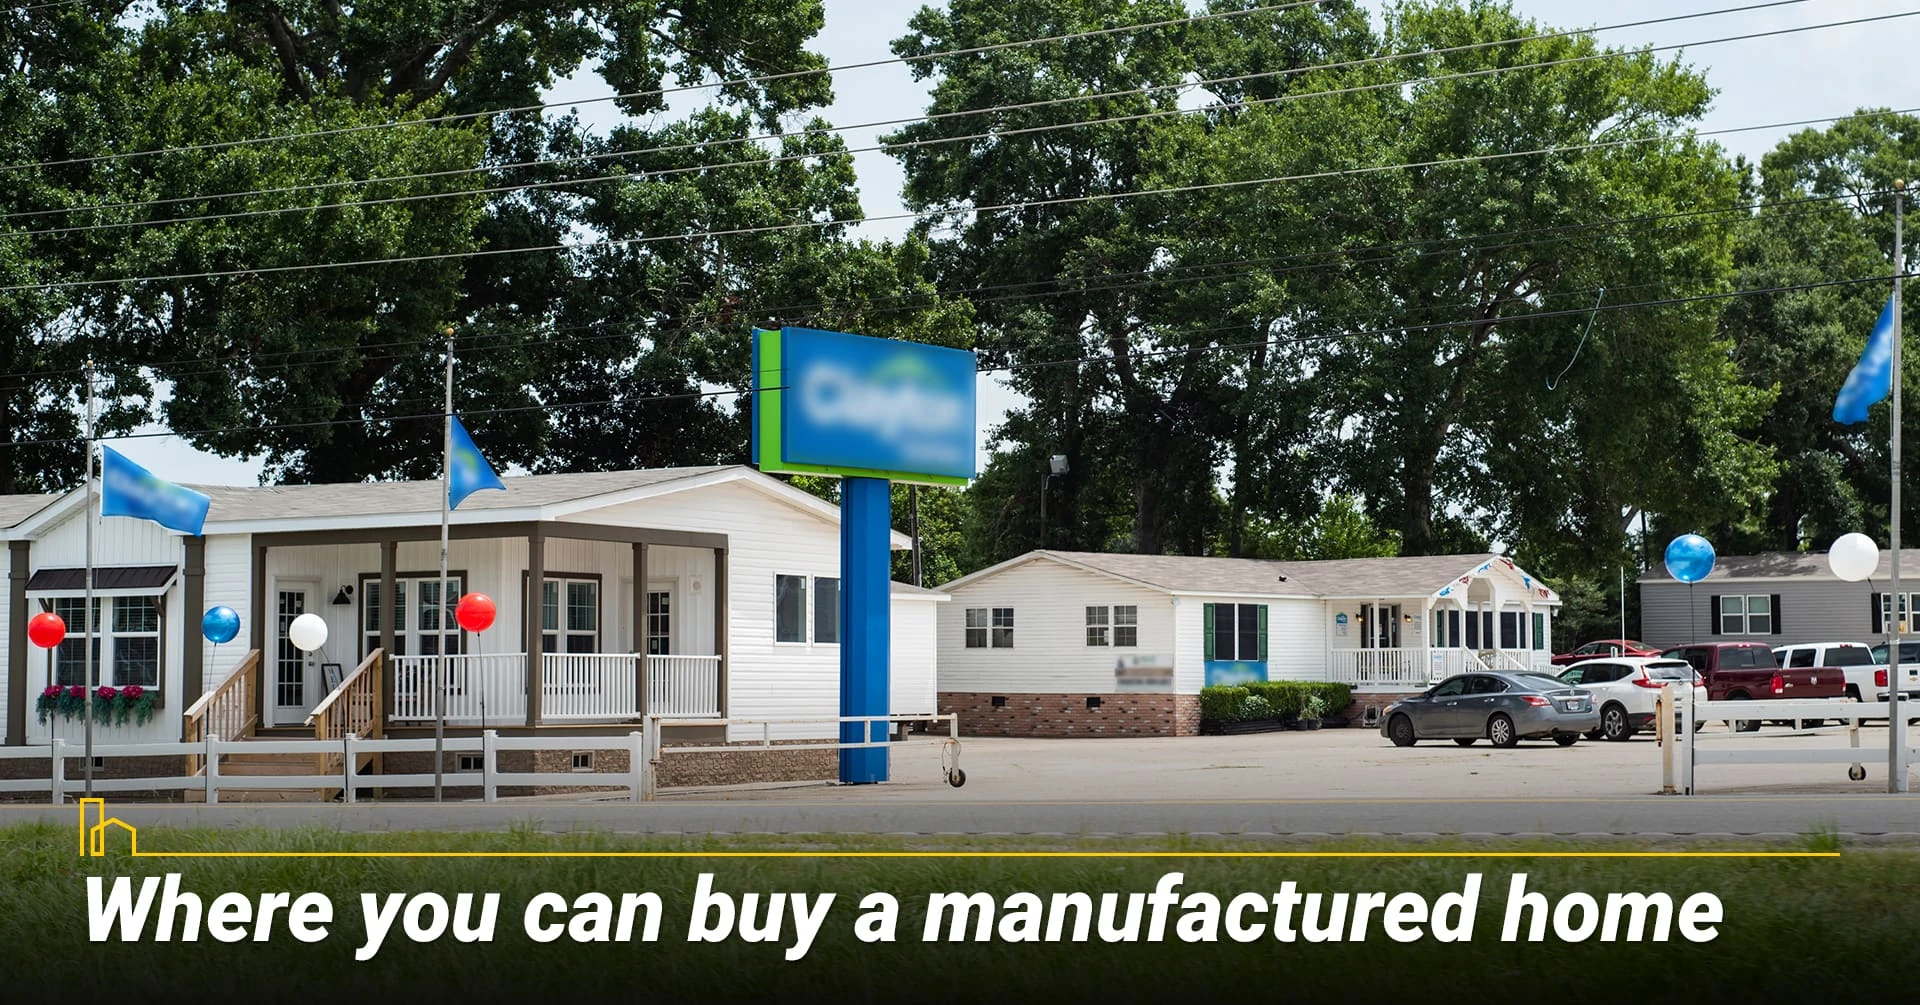 Where you can buy a manufactured home, location for manufactured home